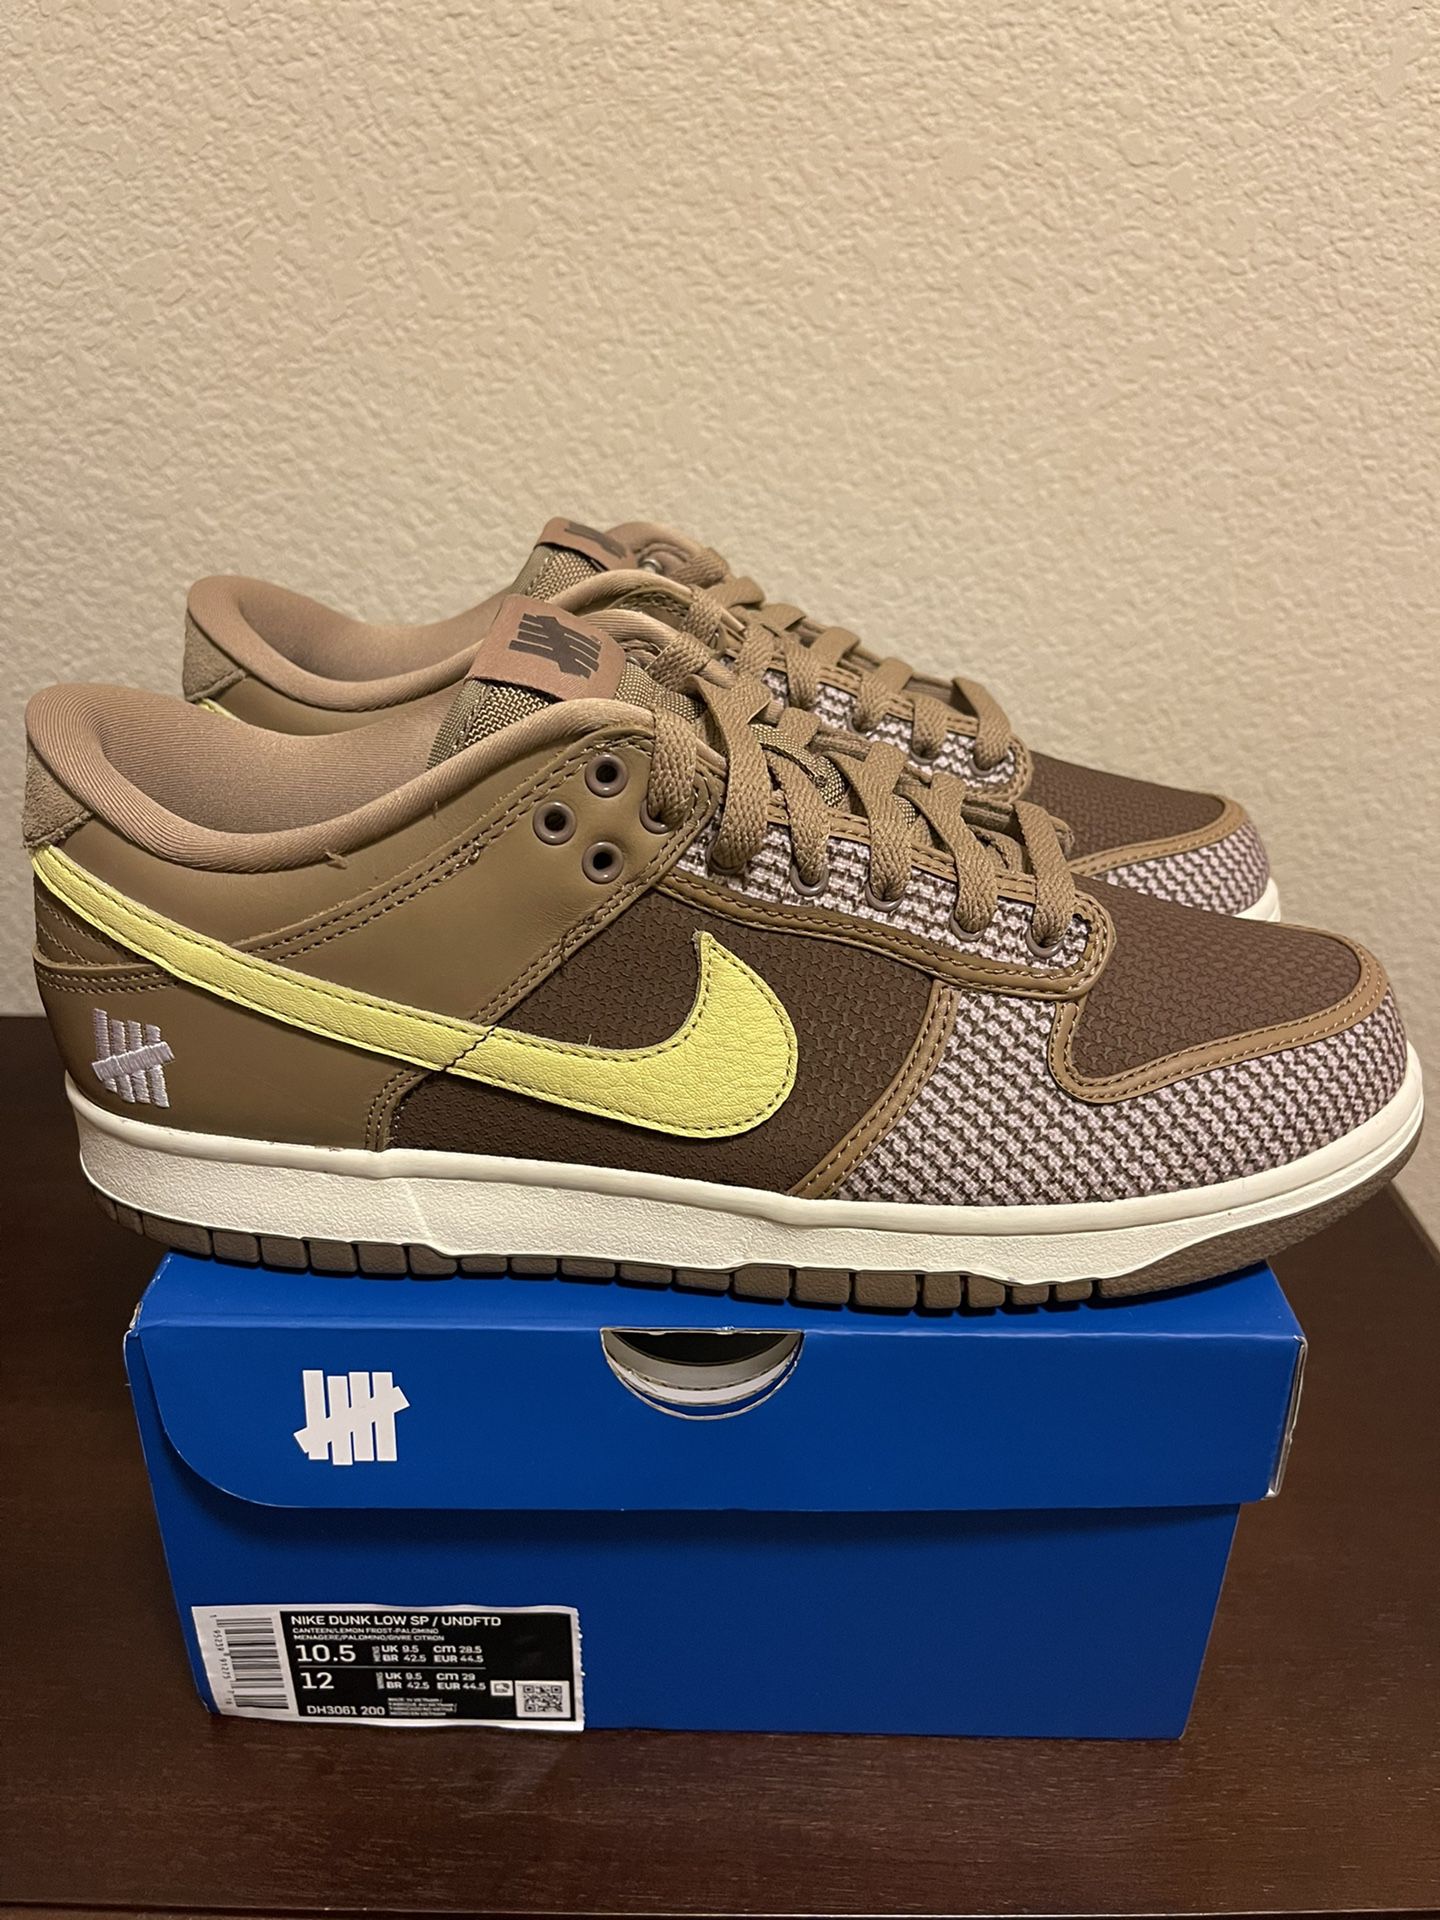 Nike x Undefeated Dunk Canteen Size 10.5 